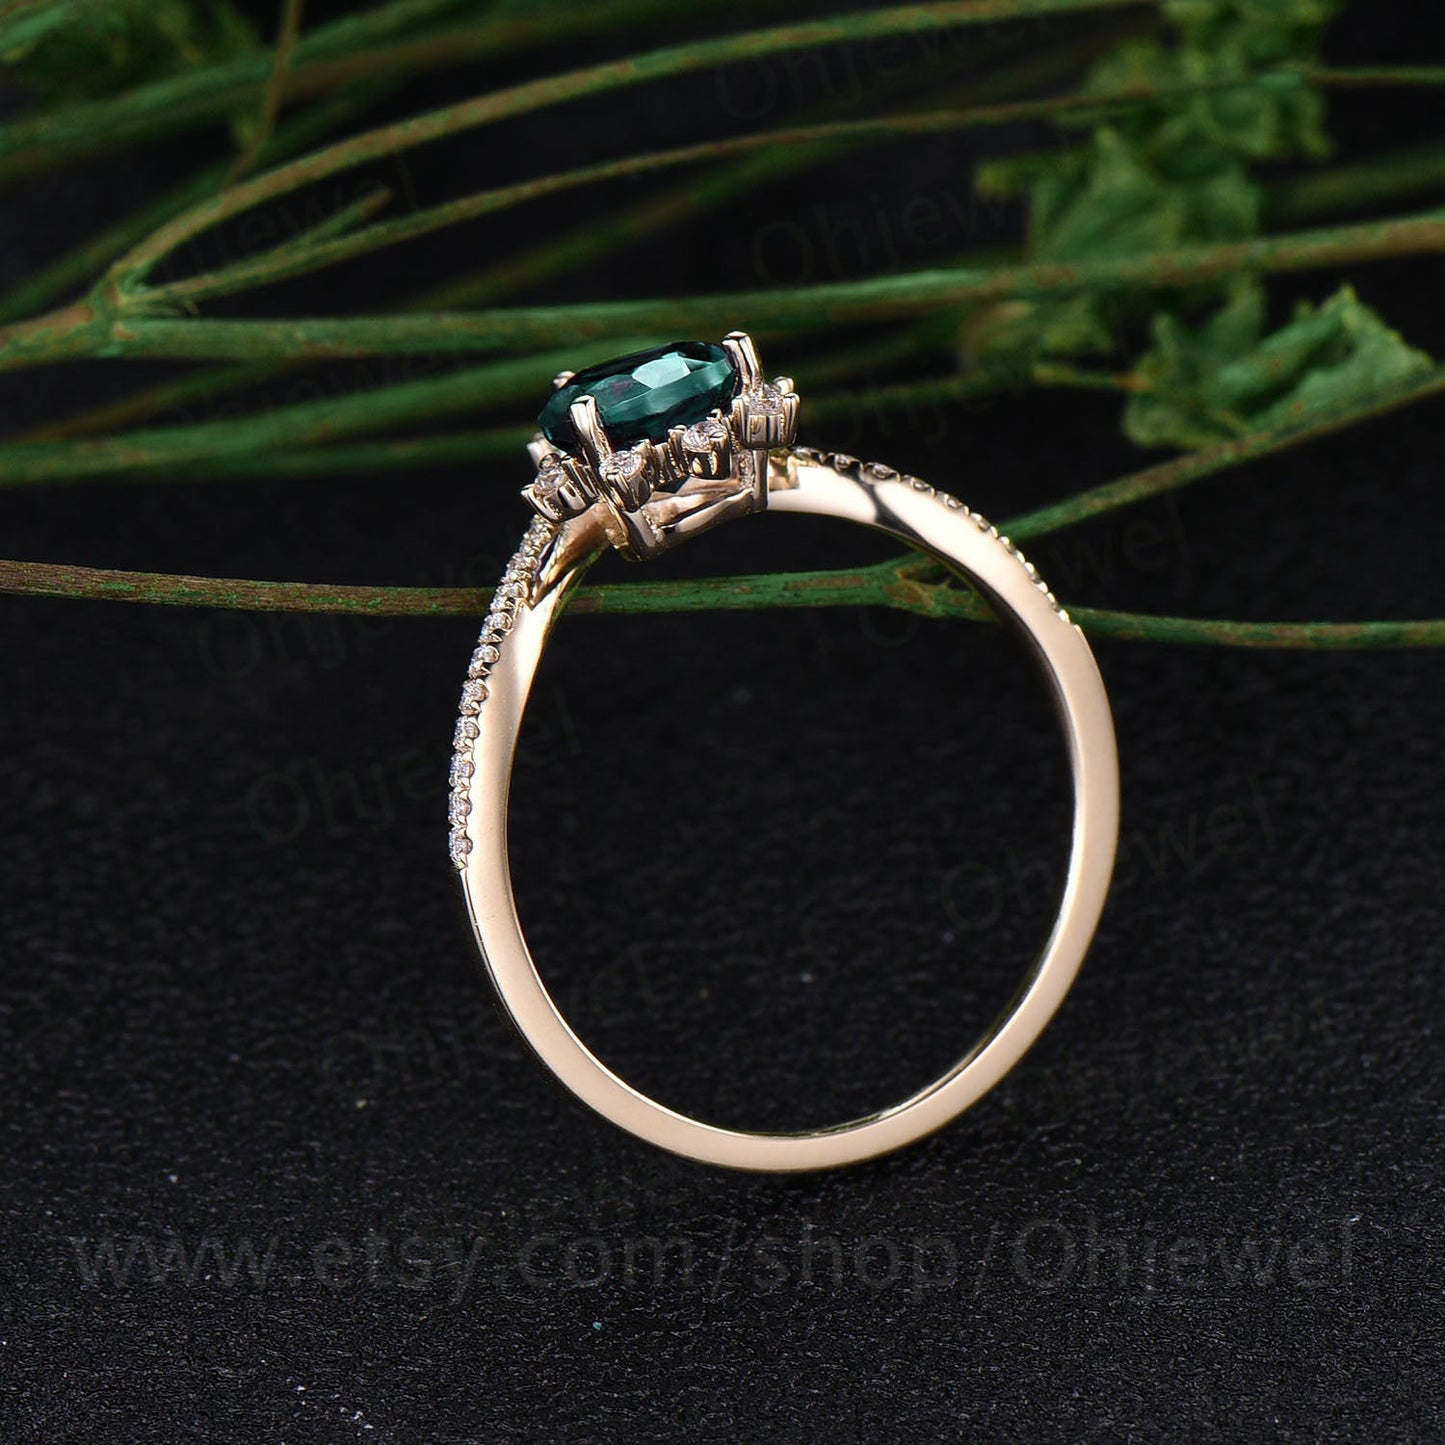 Antique vintage pear emerald engagement ring 14k yellow gold May birthstone moissanite ring anniversary wedding gift unique design ring band